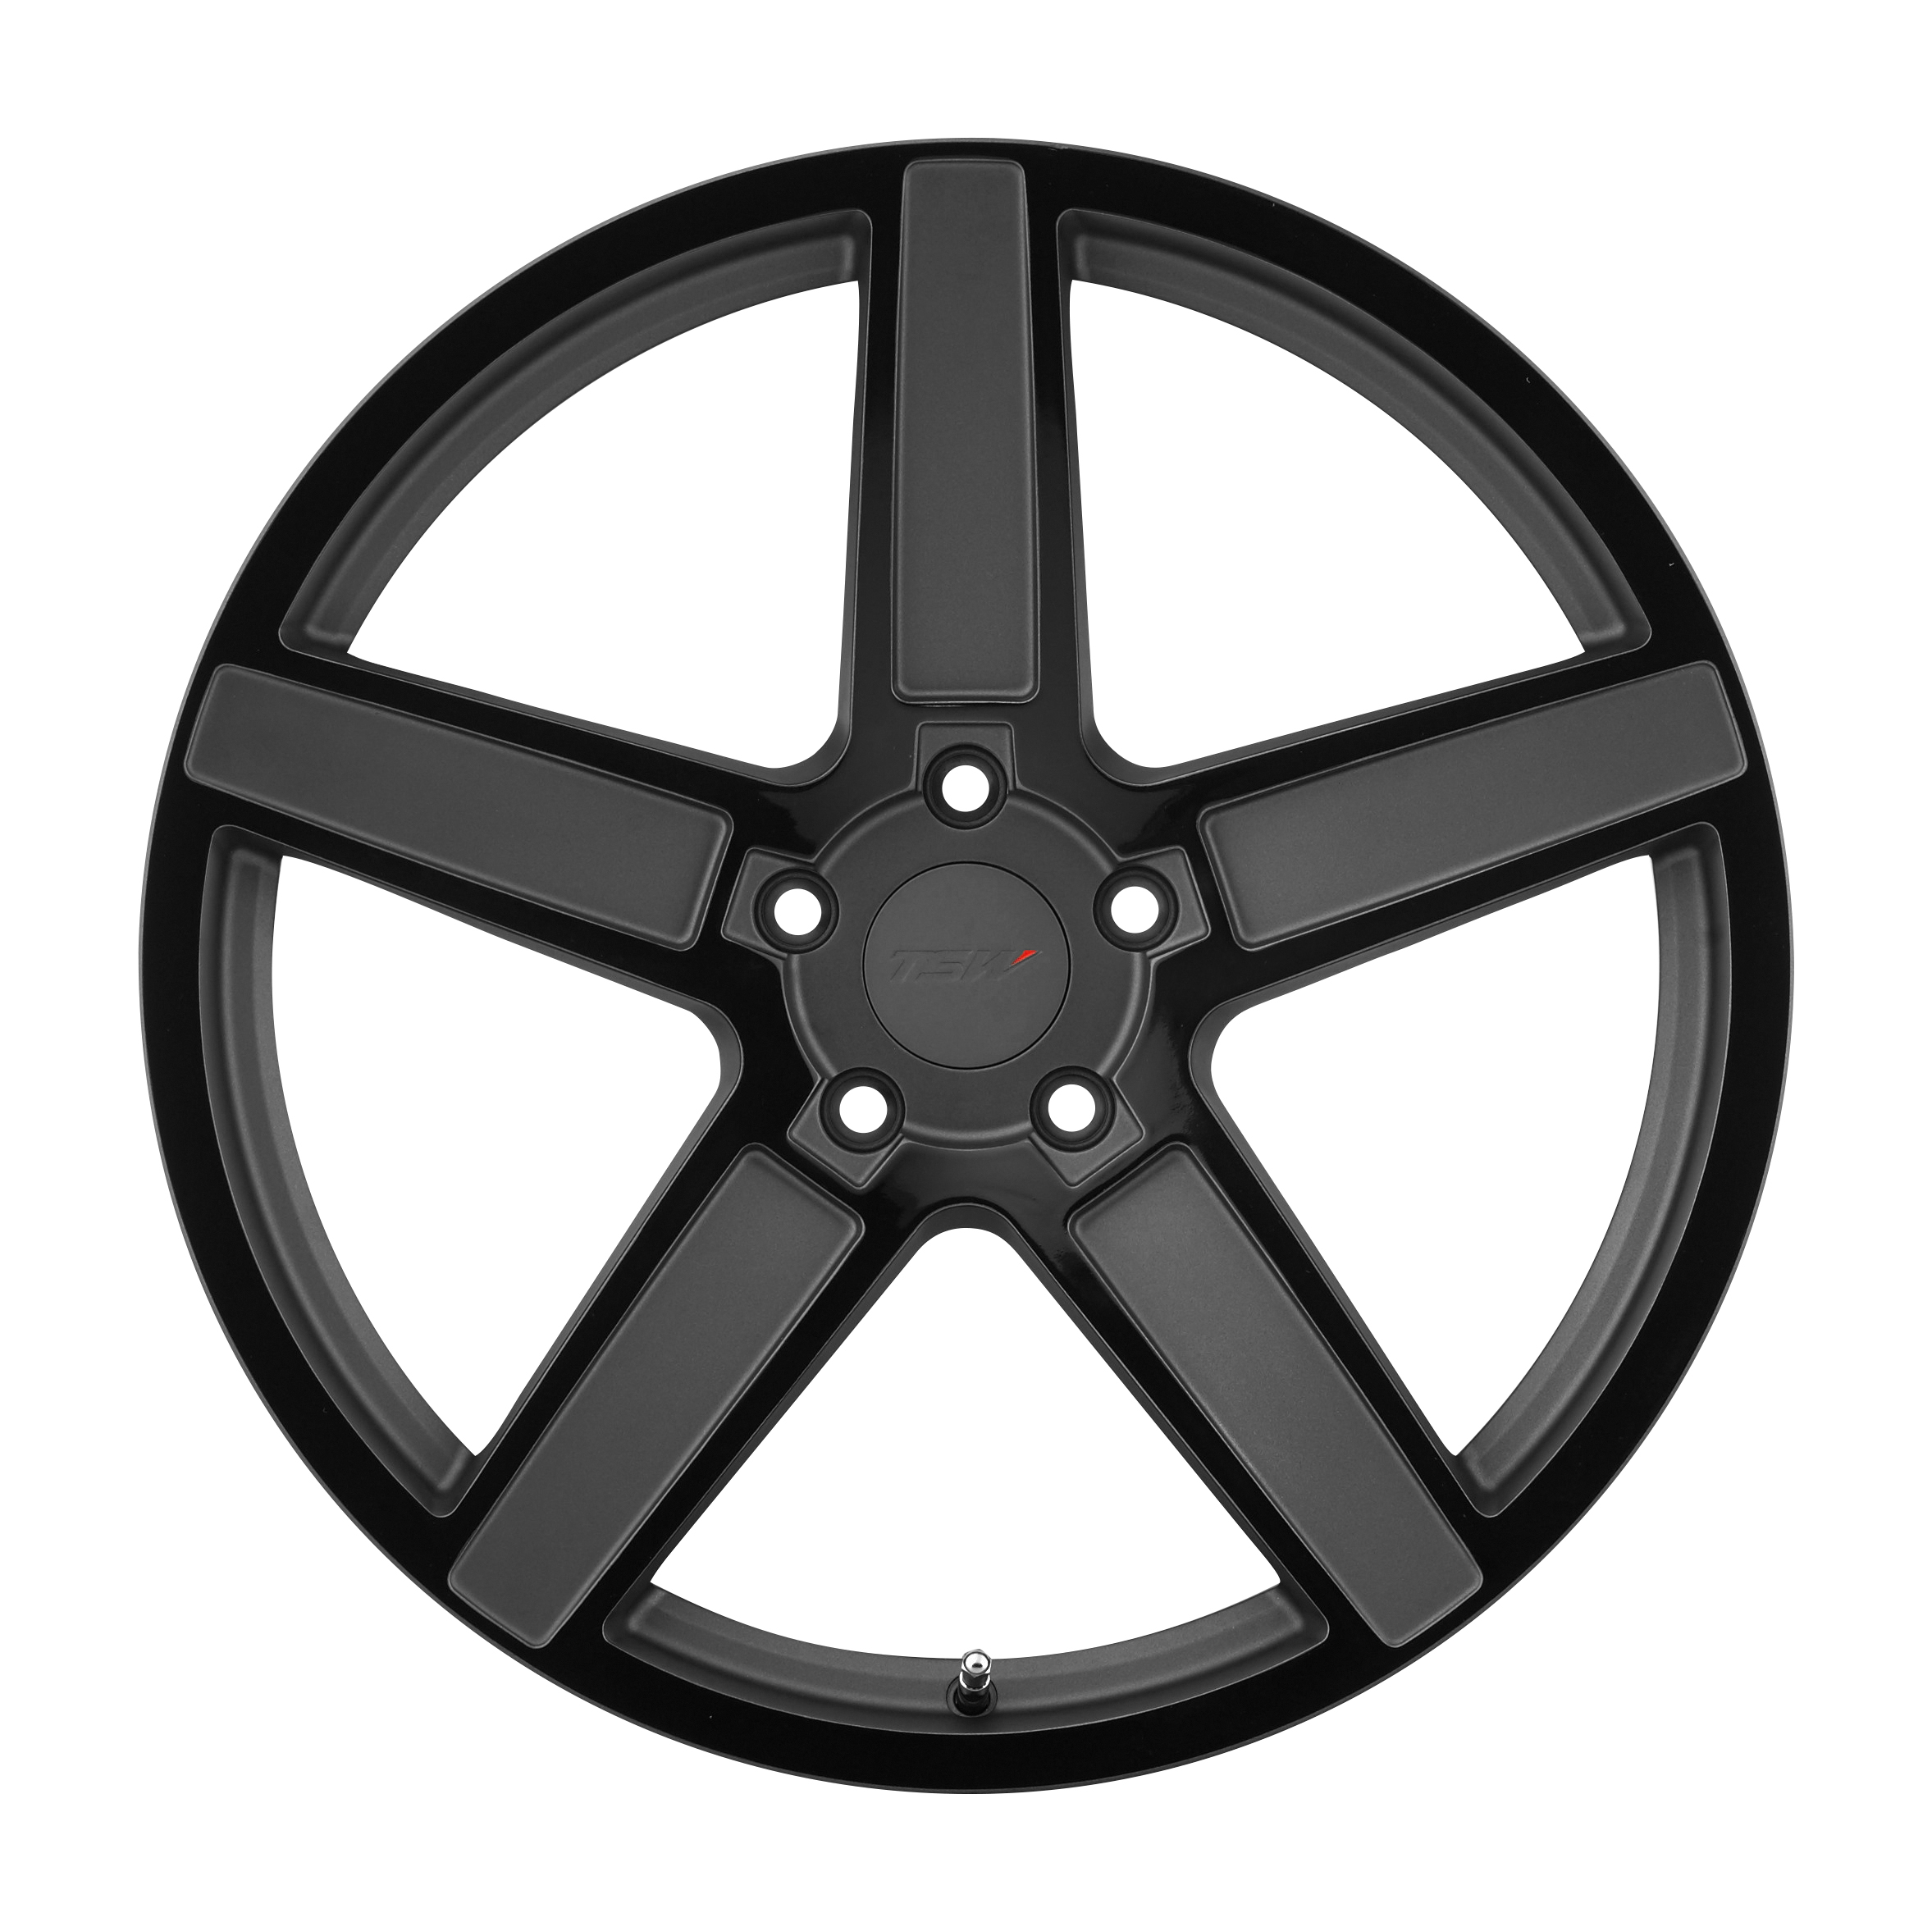 Introducing the Ascent Alloy Wheel by TSW in Matte Gunmetal with Gloss Black Face